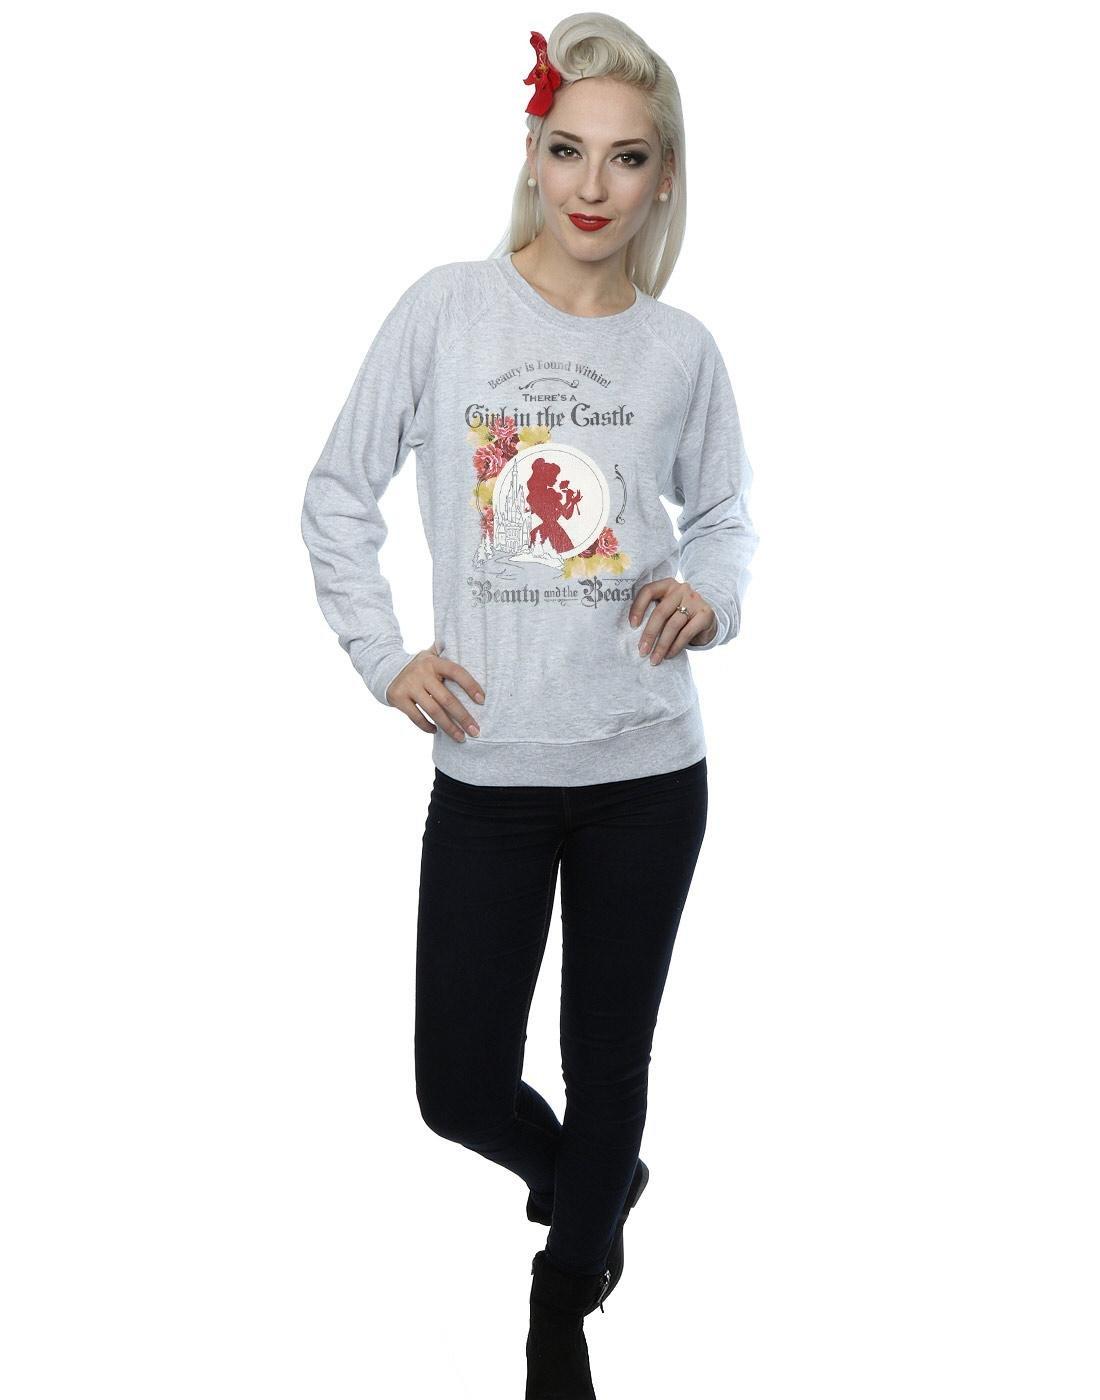 Beauty And The Beast  Girl In The Castle Sweatshirt 